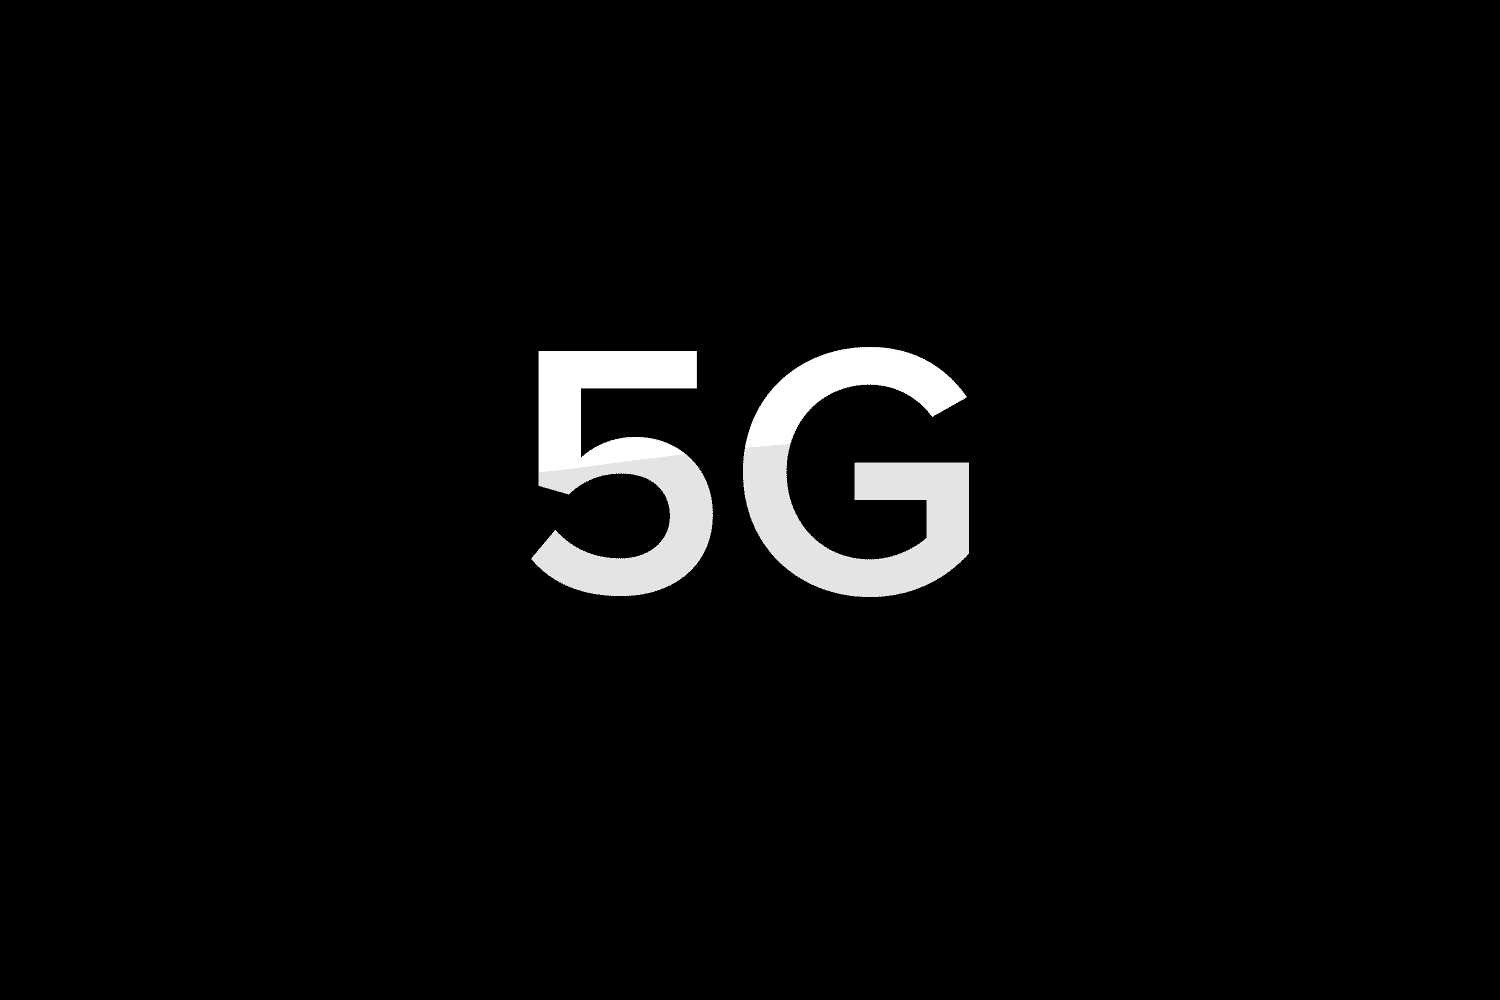 Here's how the US could address the issues with 5G